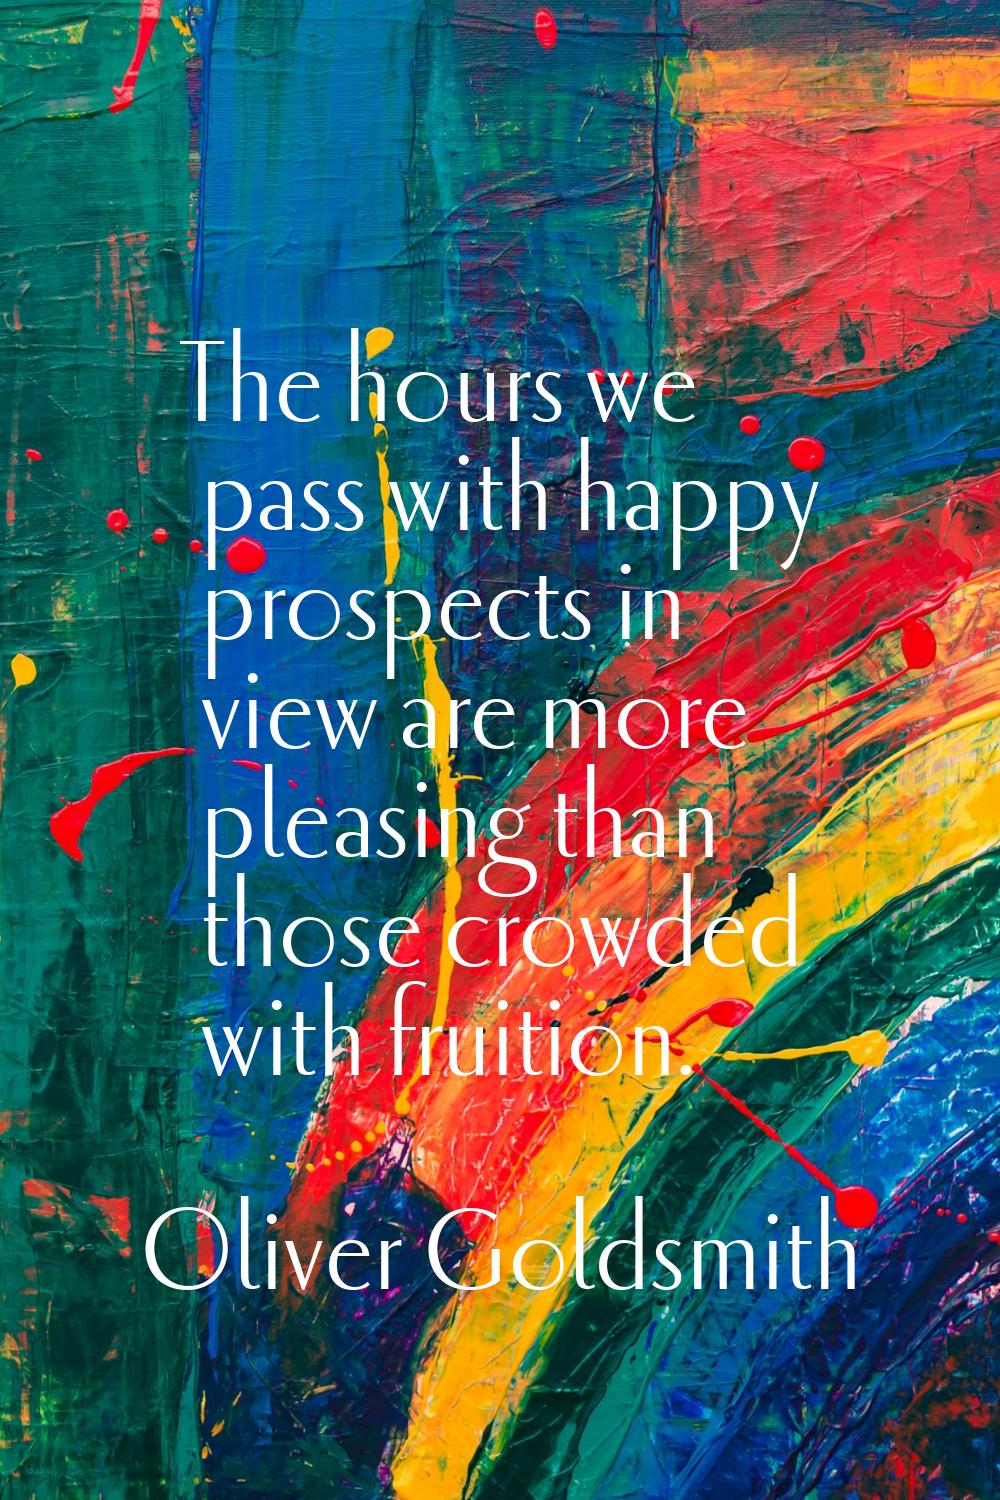 The hours we pass with happy prospects in view are more pleasing than those crowded with fruition.